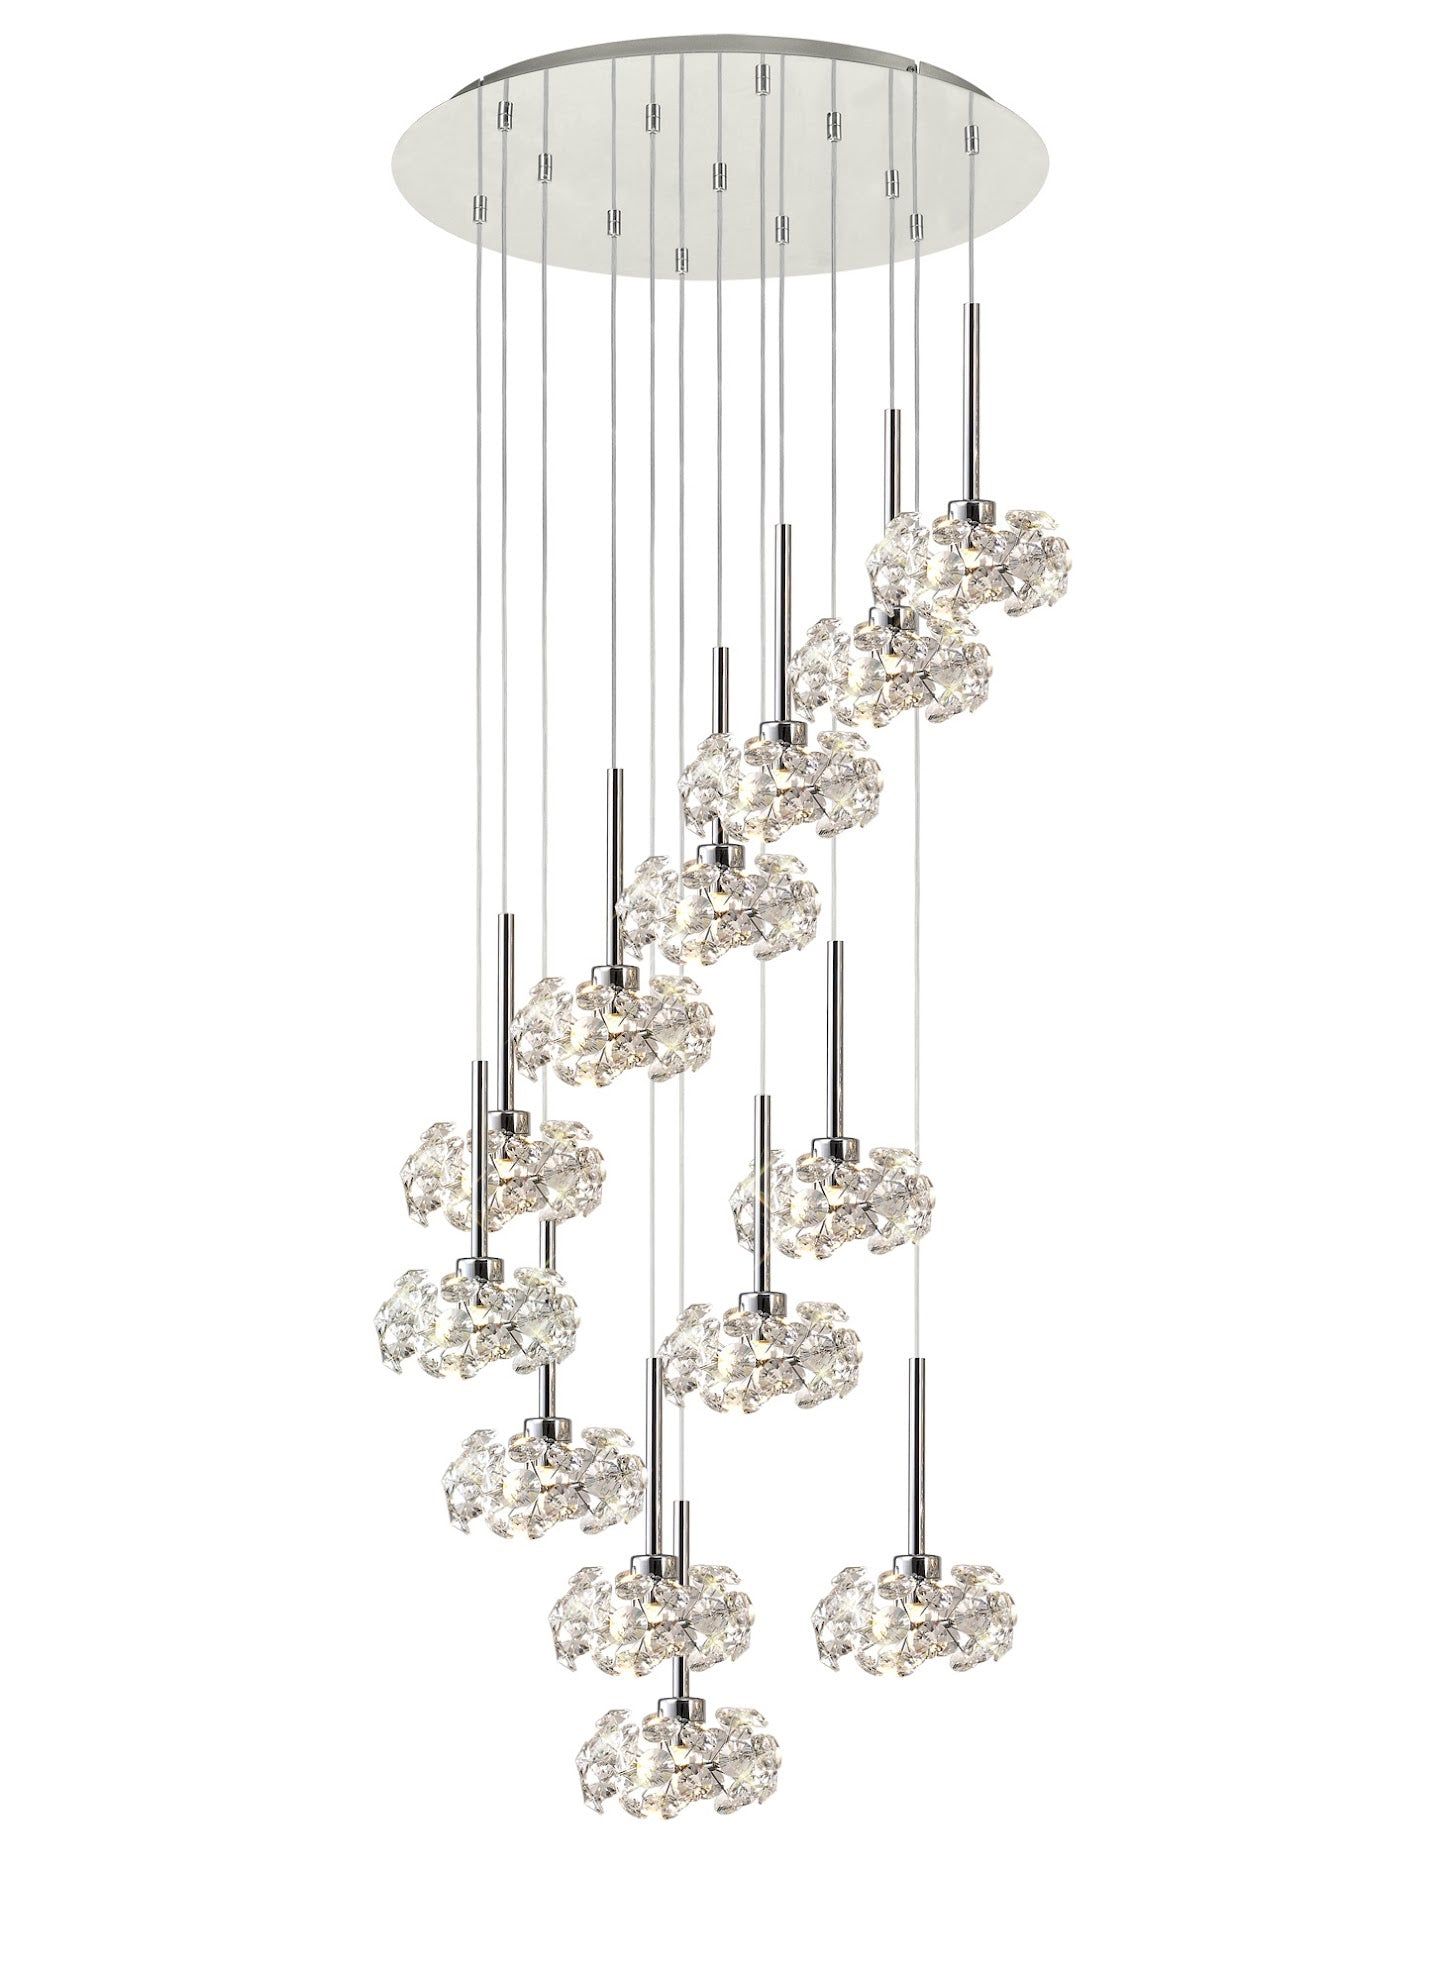 Cassis/Sophia 13 Light G9 2.5m Round Multiple Pendant With Polished Chrome And Crystal Shade